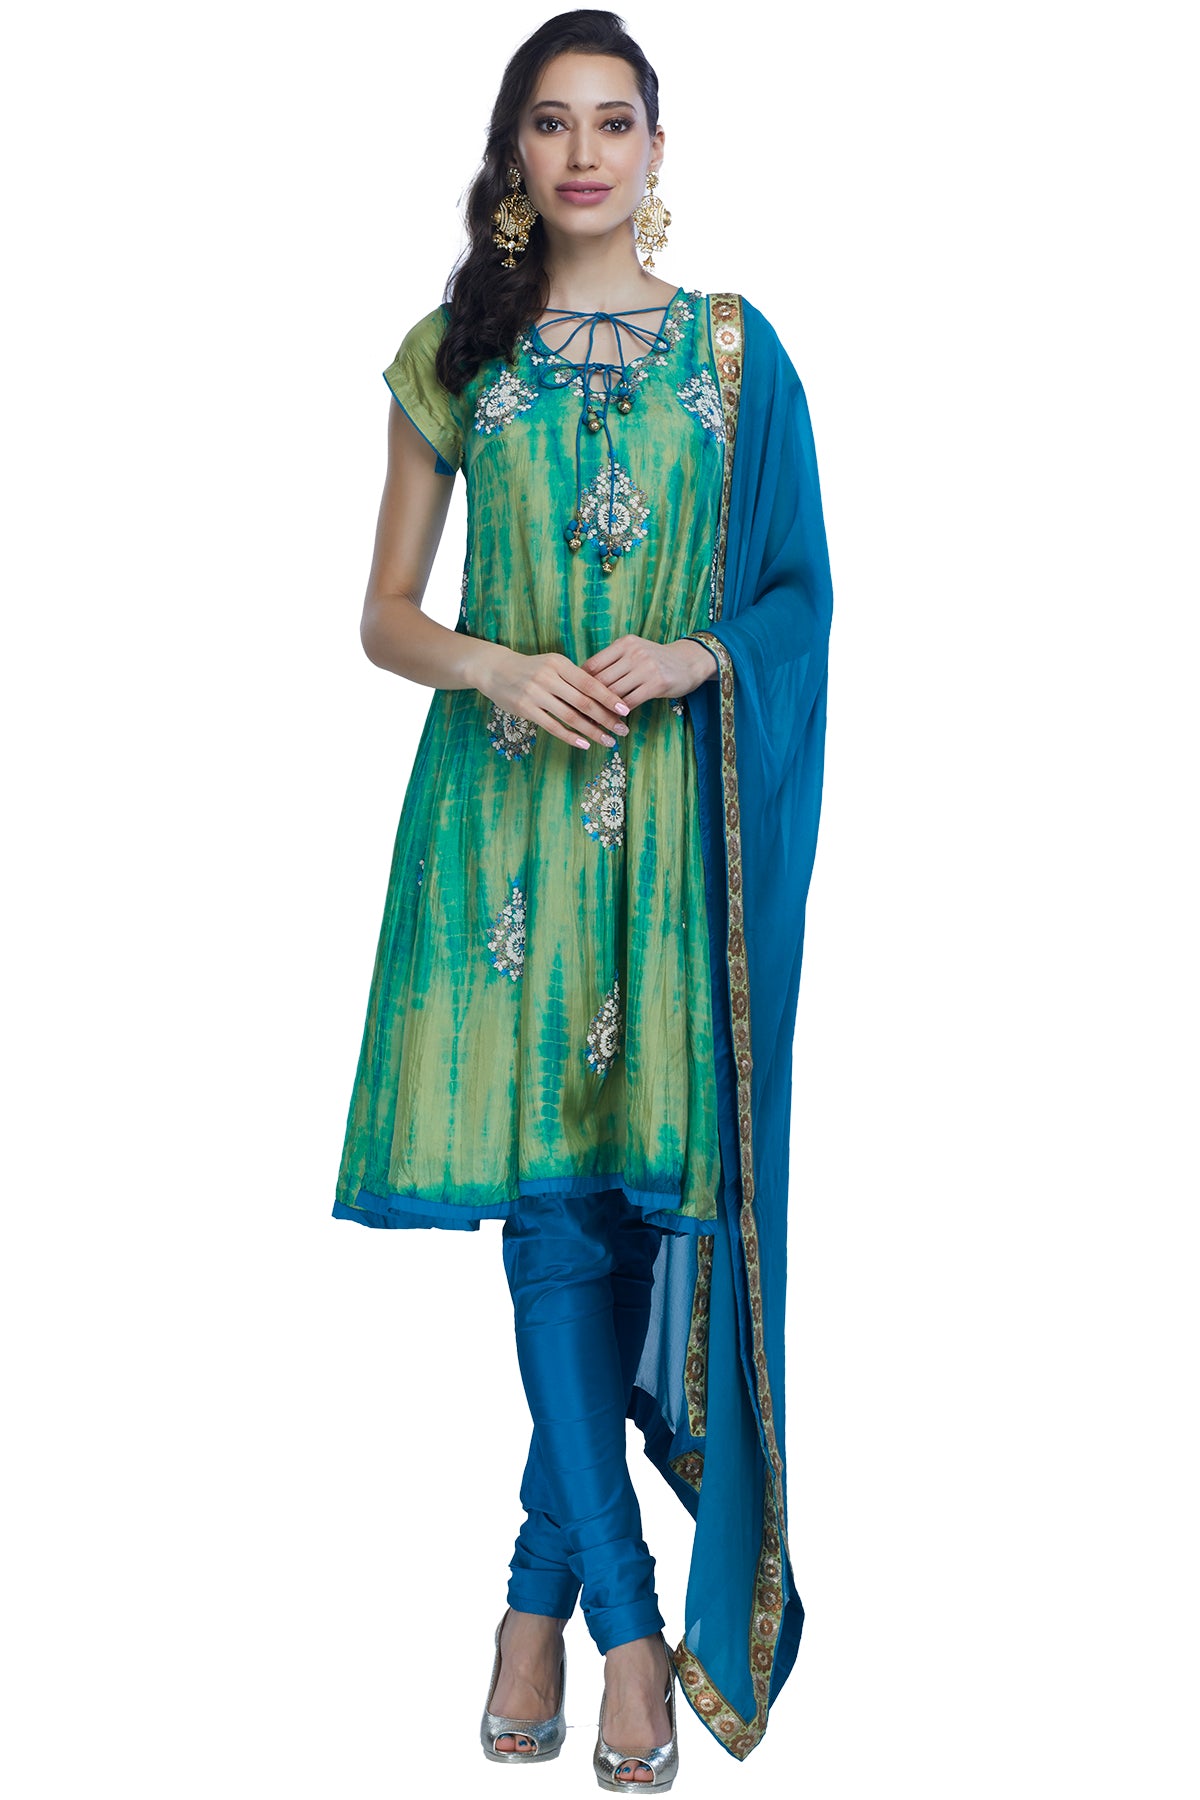 Your new staple for the upcoming festive season, this uplifting kurta churidar in the seizing hues of green and blue can be toned down for a pooja or toned up for a formal event. 
